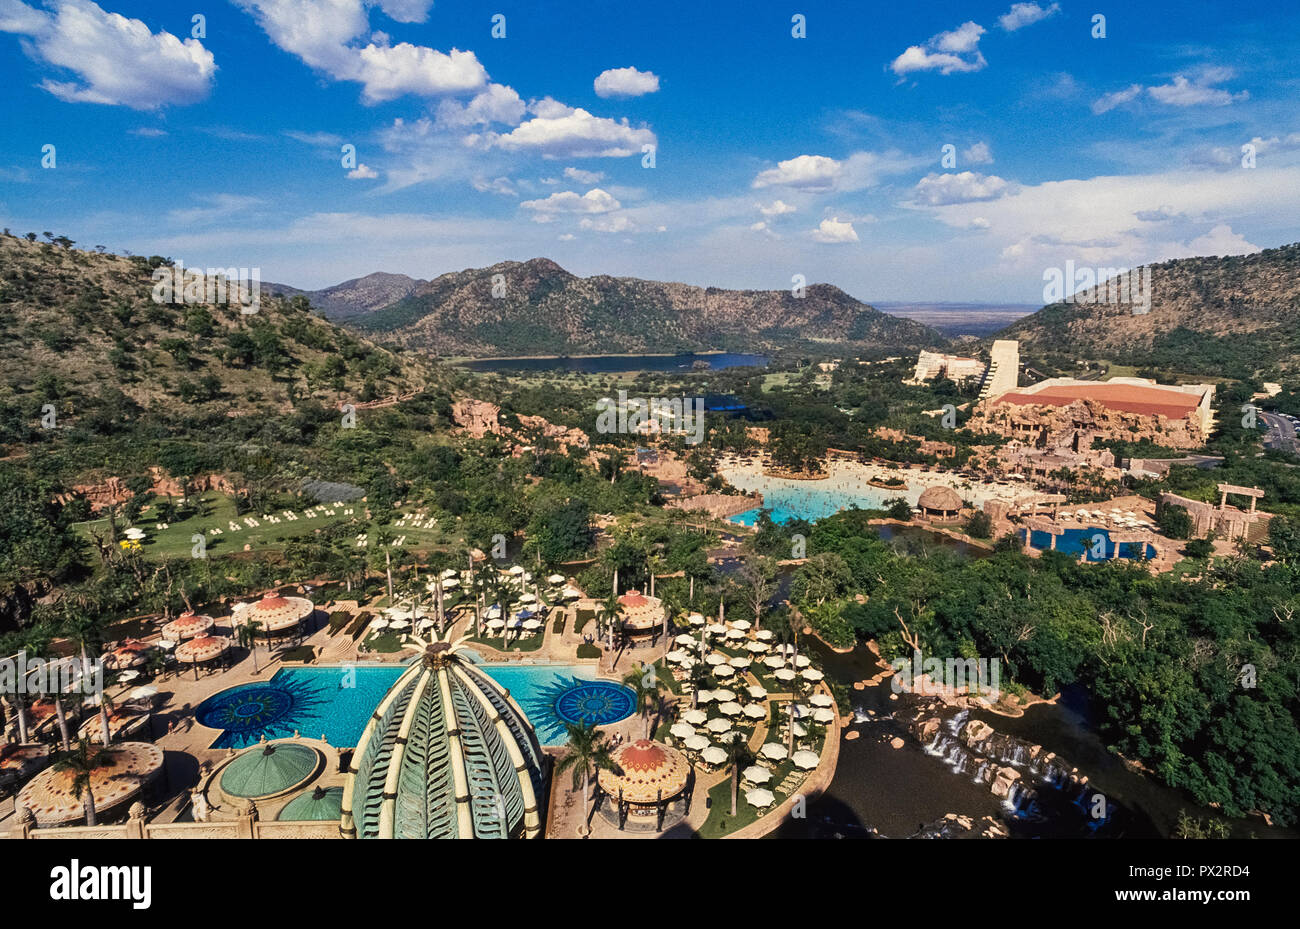 In the North West Province of South Africa is the world-renowned Sun City holiday resort, a vast playground that offers vacationers everything from a water park with a wave pool, golf courses, a gambling casino, hot-air balloon rides, and even animal safaris in the adjacent game park. Guests have a choice of four lodgings, including The Palace of the Lost City, a luxurious 5-star hotel from the top of which this panoramic view was photographed. Stock Photo